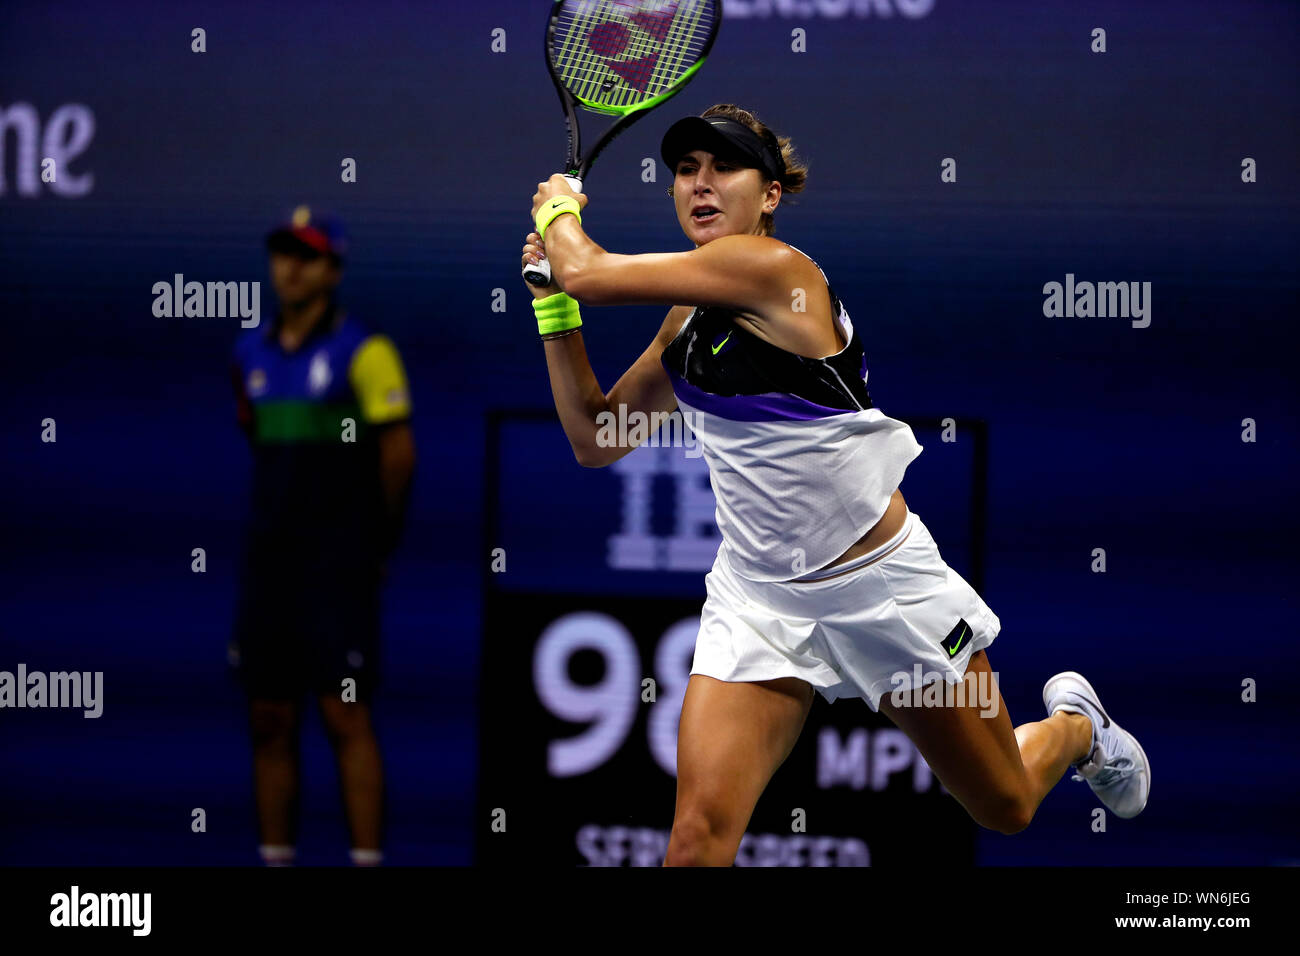 Flushing Meadows, New York, United States - 5 September 2019.  Belinda Bencic of Switzerland in action during here semi final against Canada's Bianca Andreescu at the US Open in Flushing Meadows, New York.  Andreescu won the match in straight sets and will face Serena Williams in Saturday's final Stock Photo